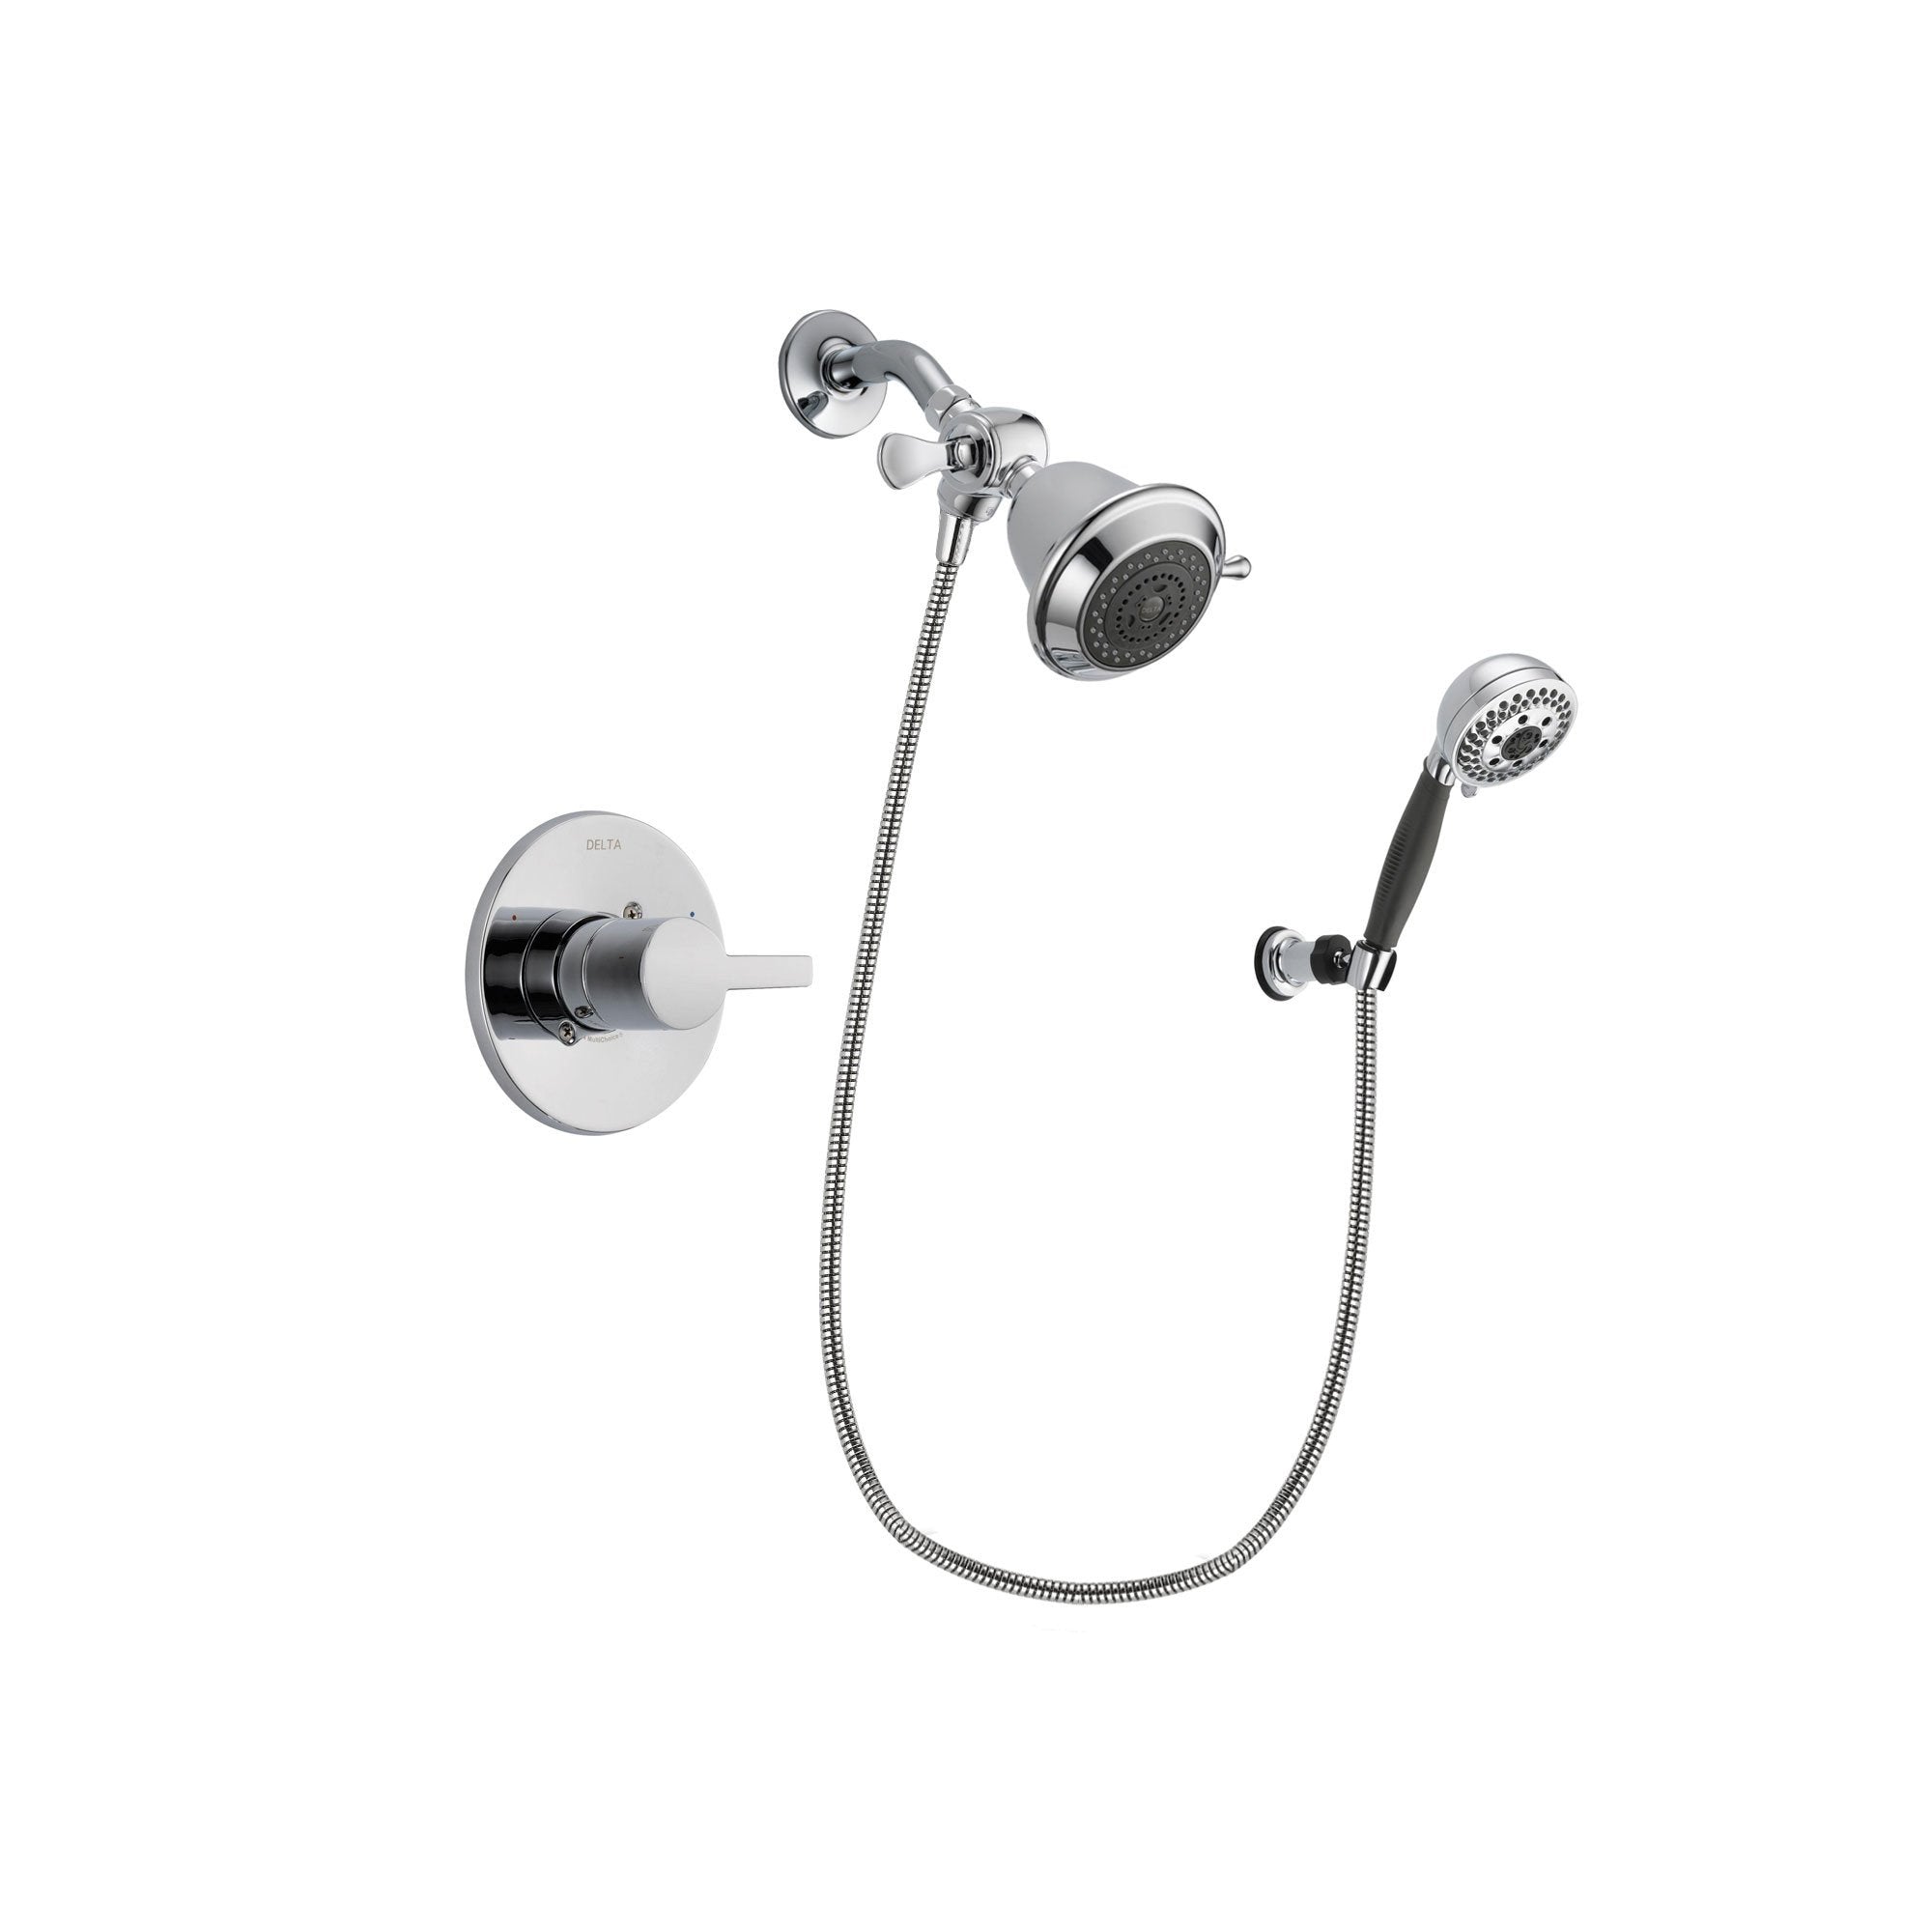 Delta Compel Chrome Shower Faucet System w/ Shower Head and Hand Shower DSP1120V